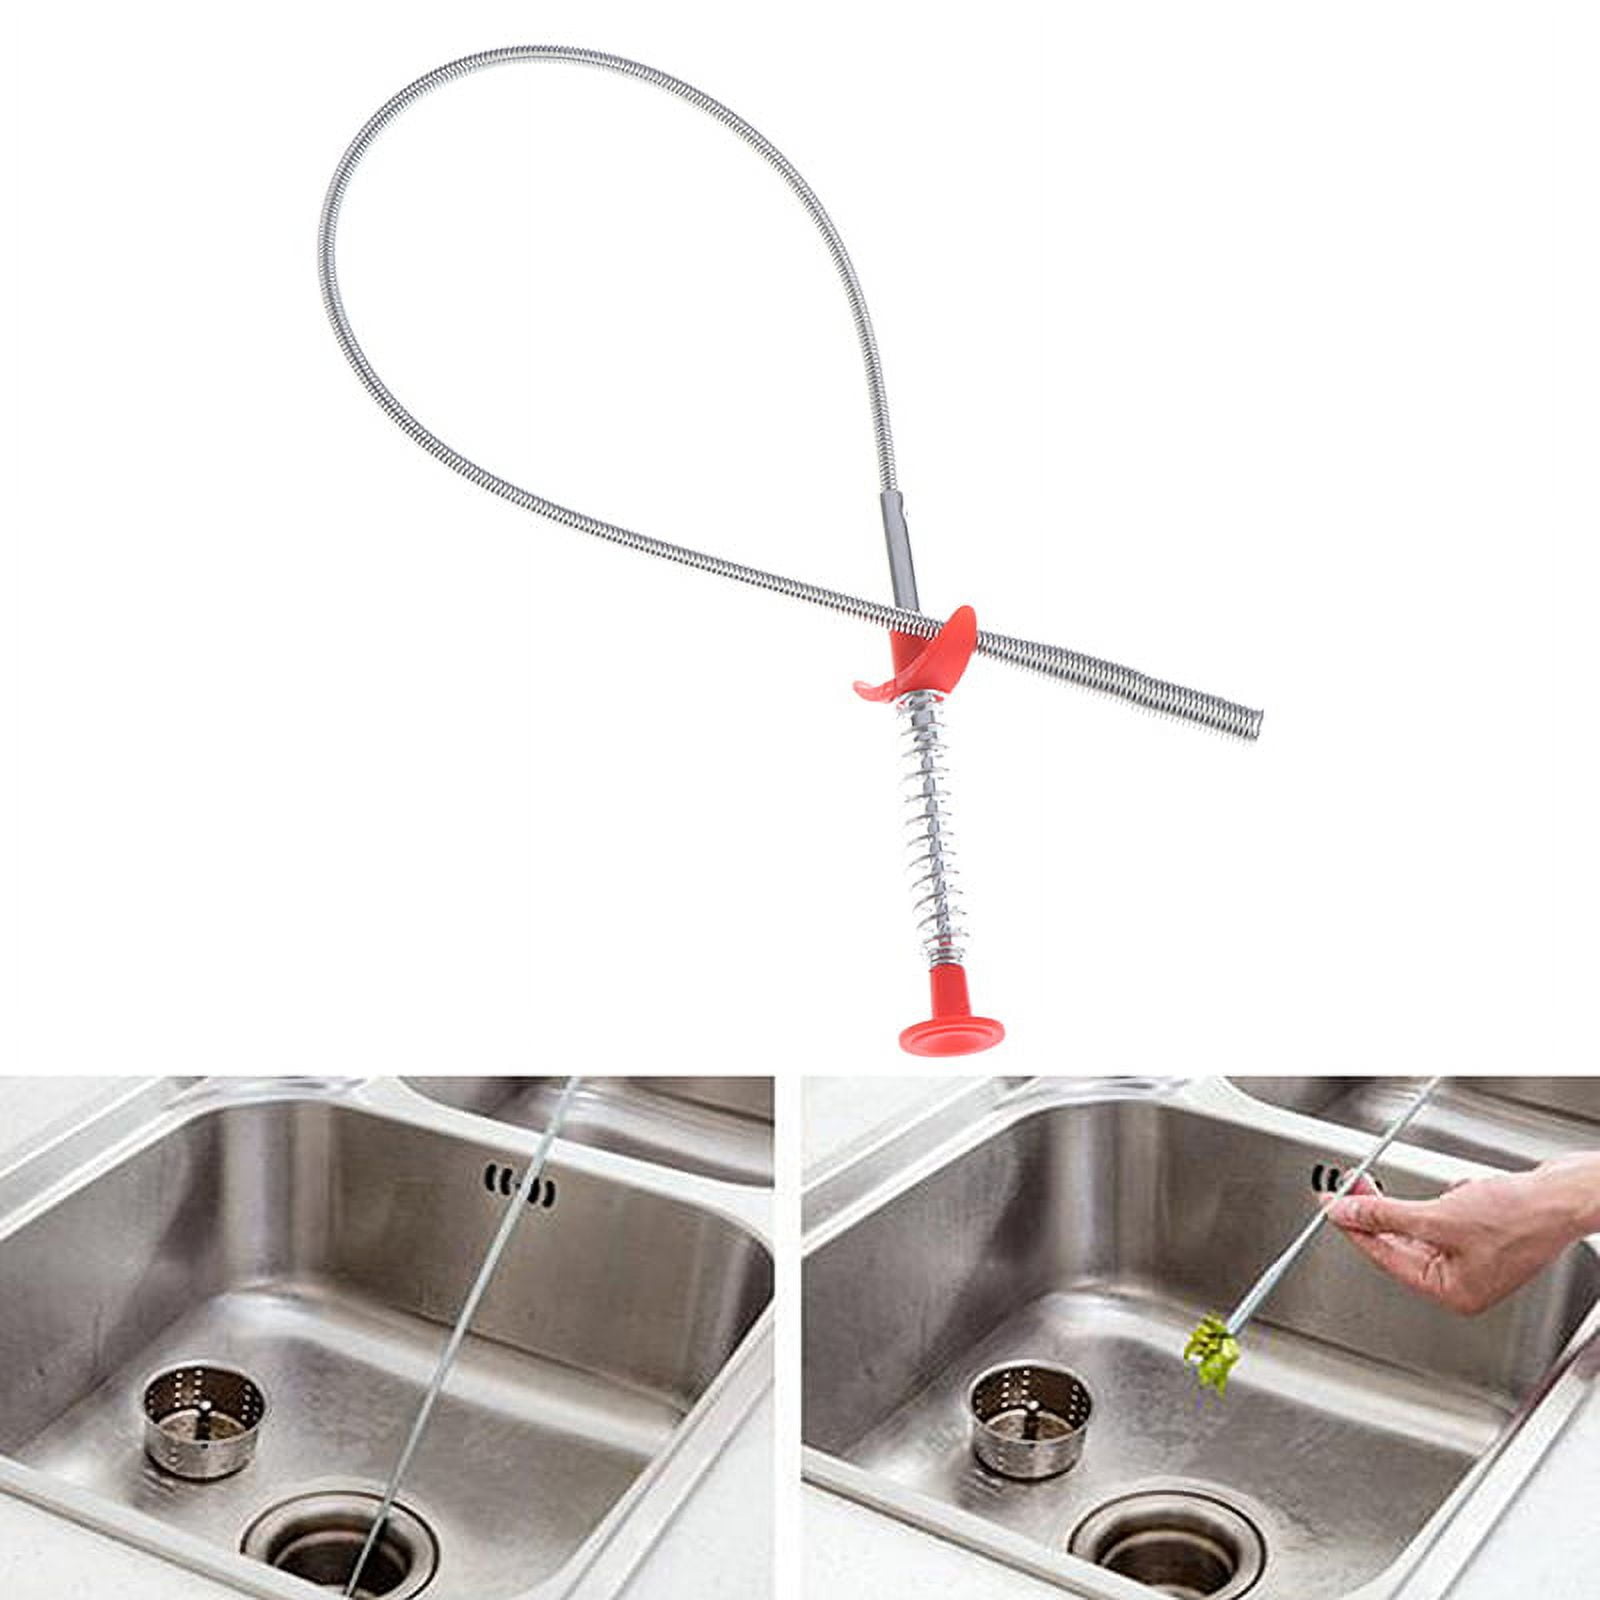  jiawangwang Spring Pipe Dredging Tool, Multifunctional Cleaning  Claw, Bendable Sewer Drain Cleaning Brush, Pressure-Type Cleaning Hook for  Kitchen, Bathroom and Restaurant (90cm,Black) : Health & Household